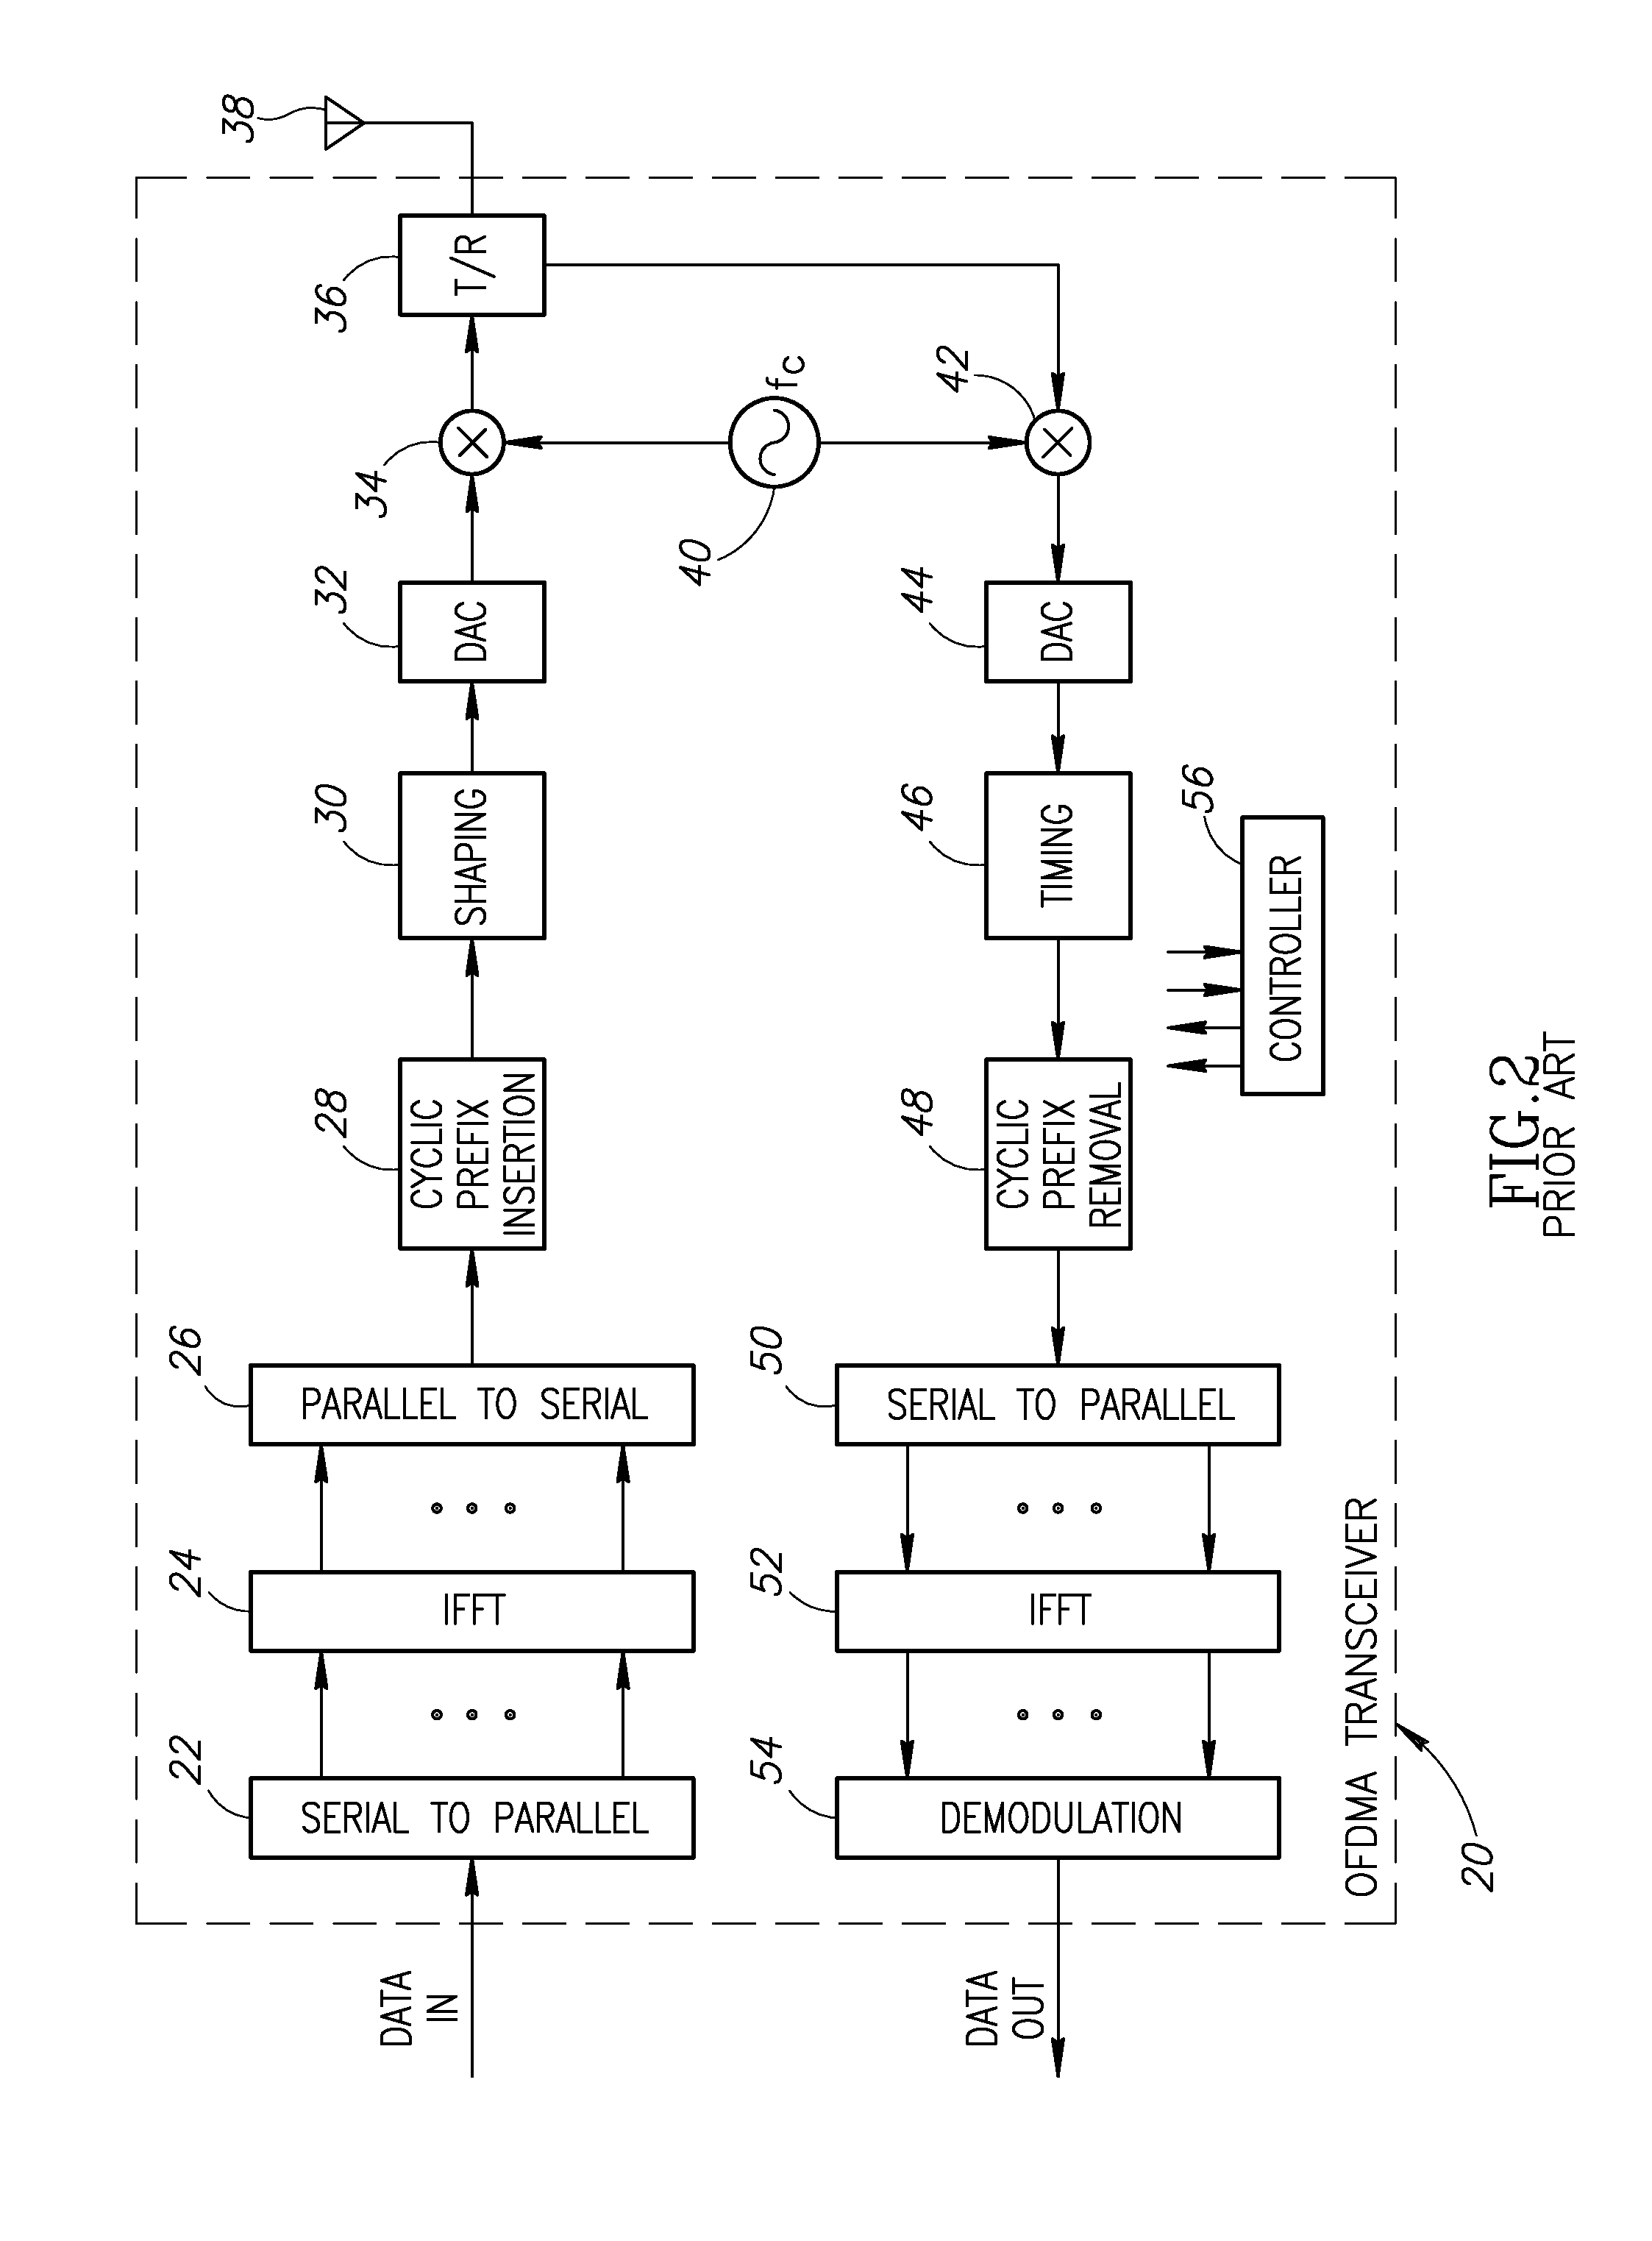 Control channel signaling in a multiple access wireless communication system